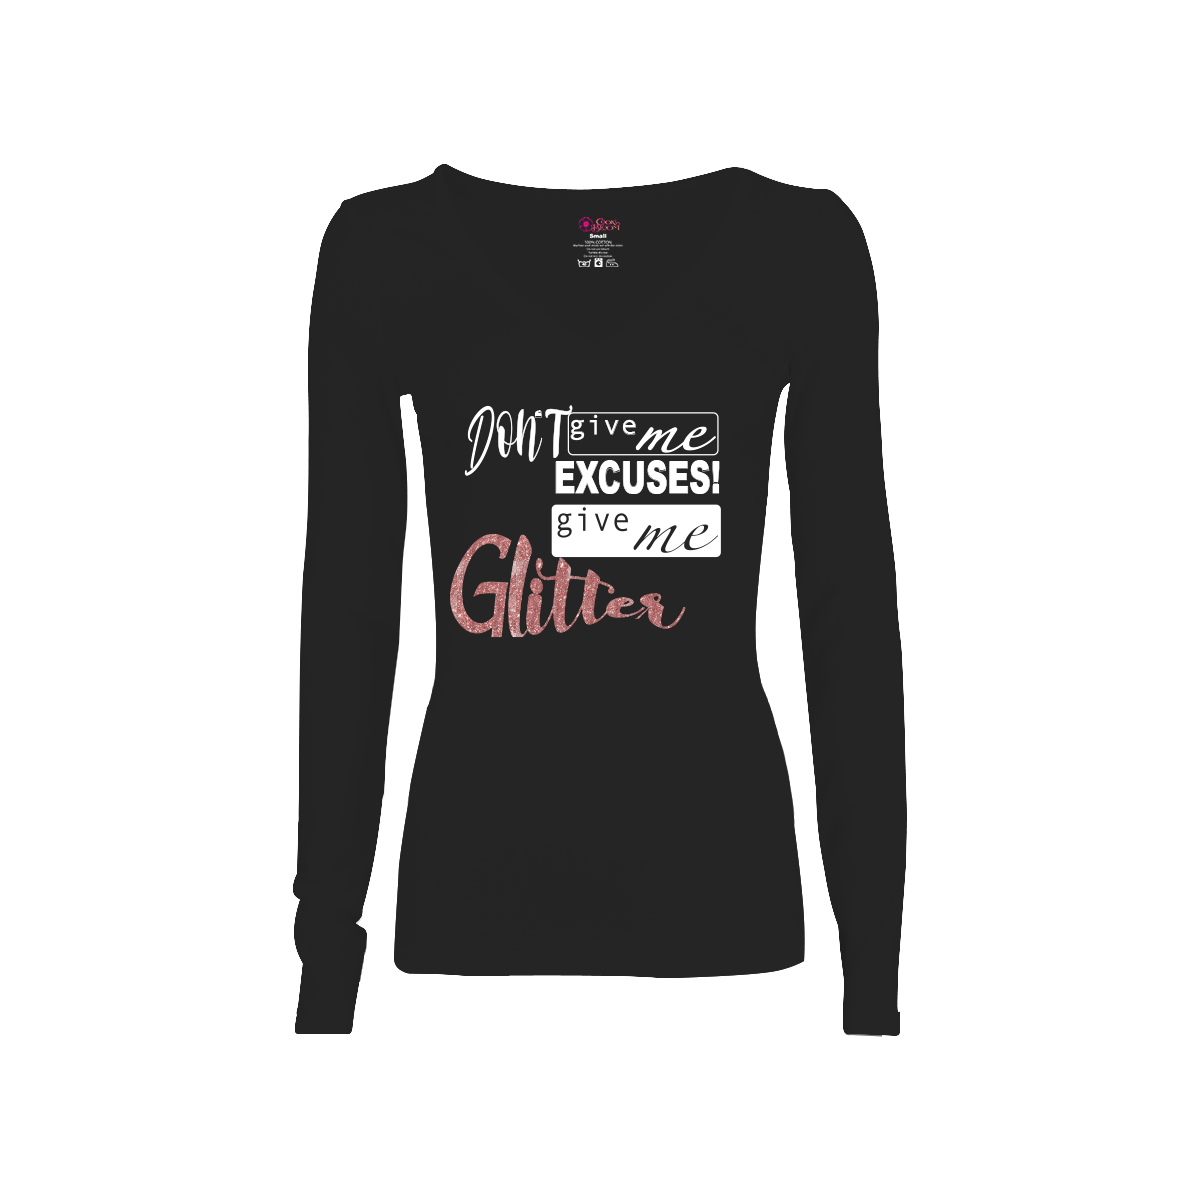 CookiBloom shirts Don't Give Me Excuses, Give Me Glitter Long-Sleeve Shirt